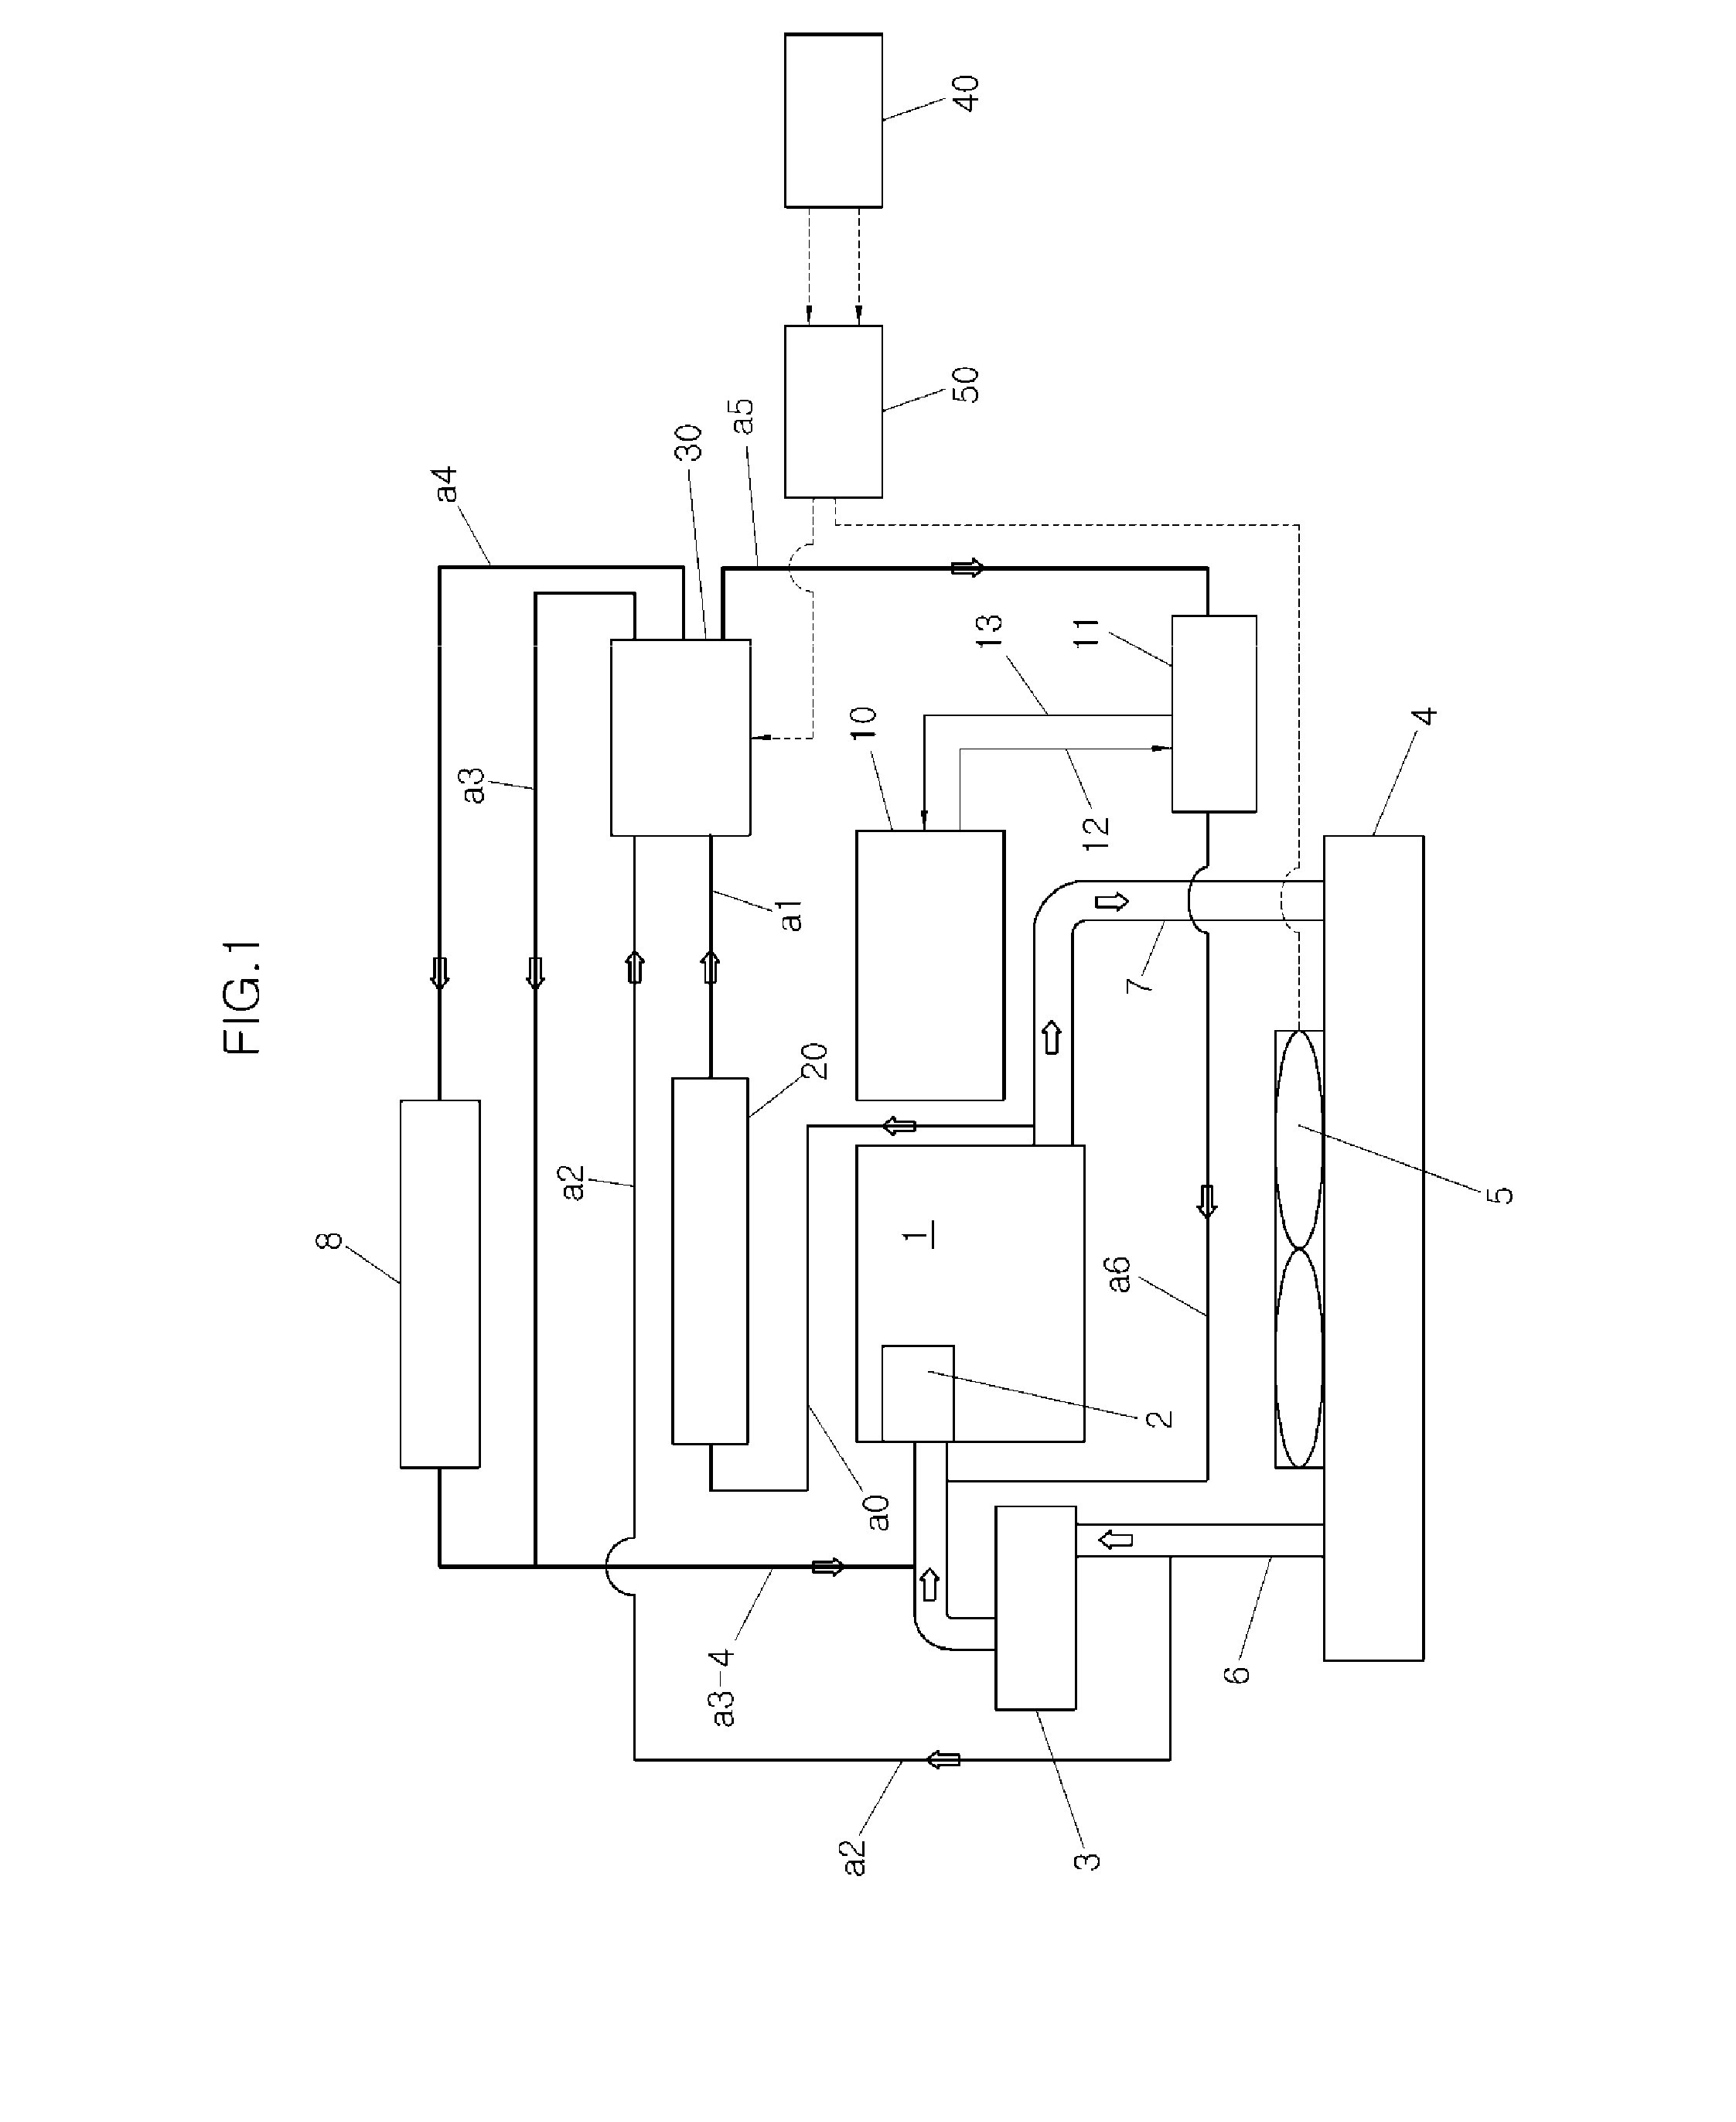 Integrated heat management system in vehicle and heat management method using the same